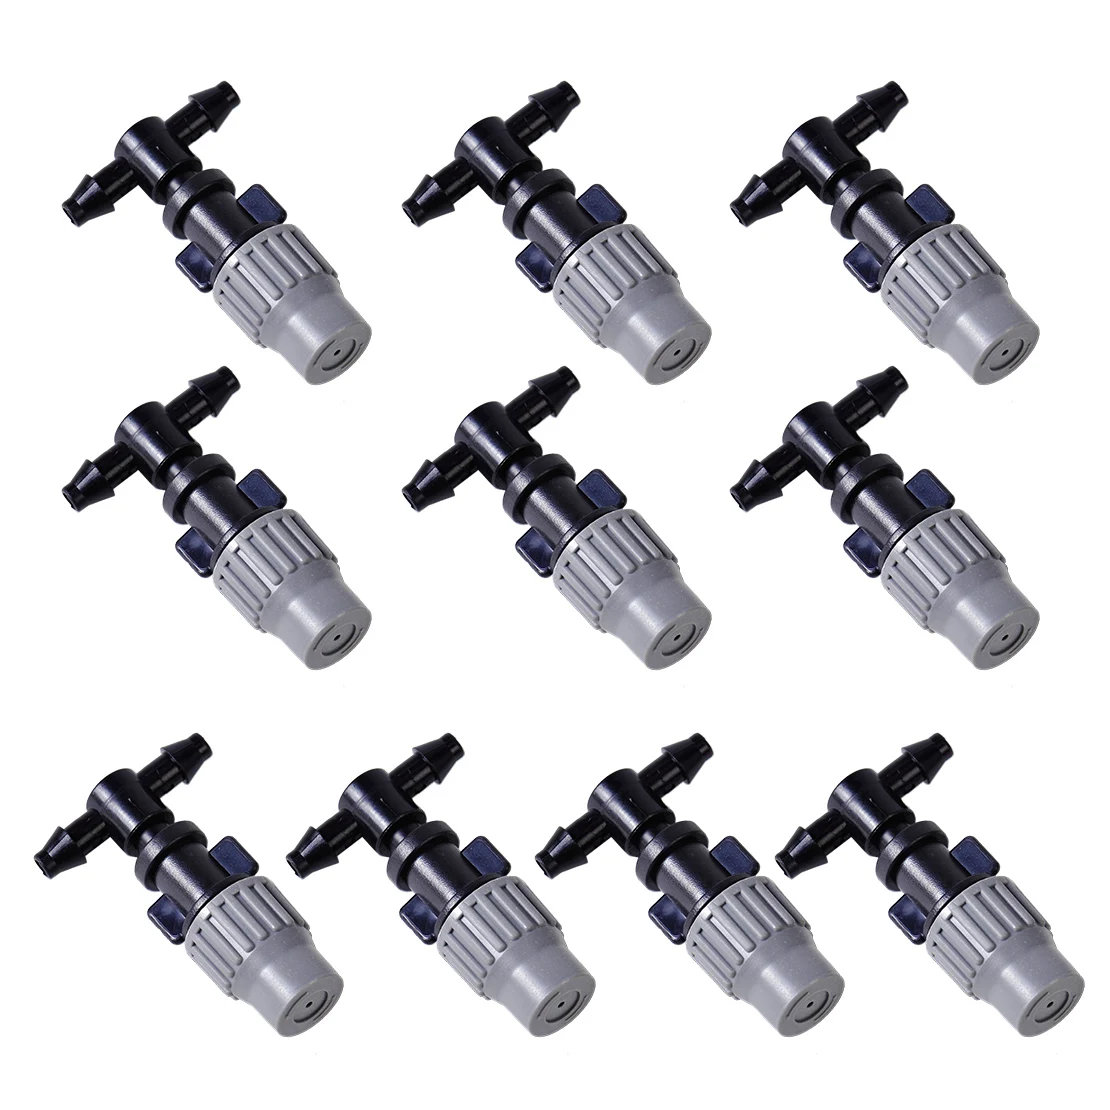 

LETAOSK 10pcs Misting Atomizing Sprinkler Nozzles Tee for Greenhouse Garden Lawn Grass